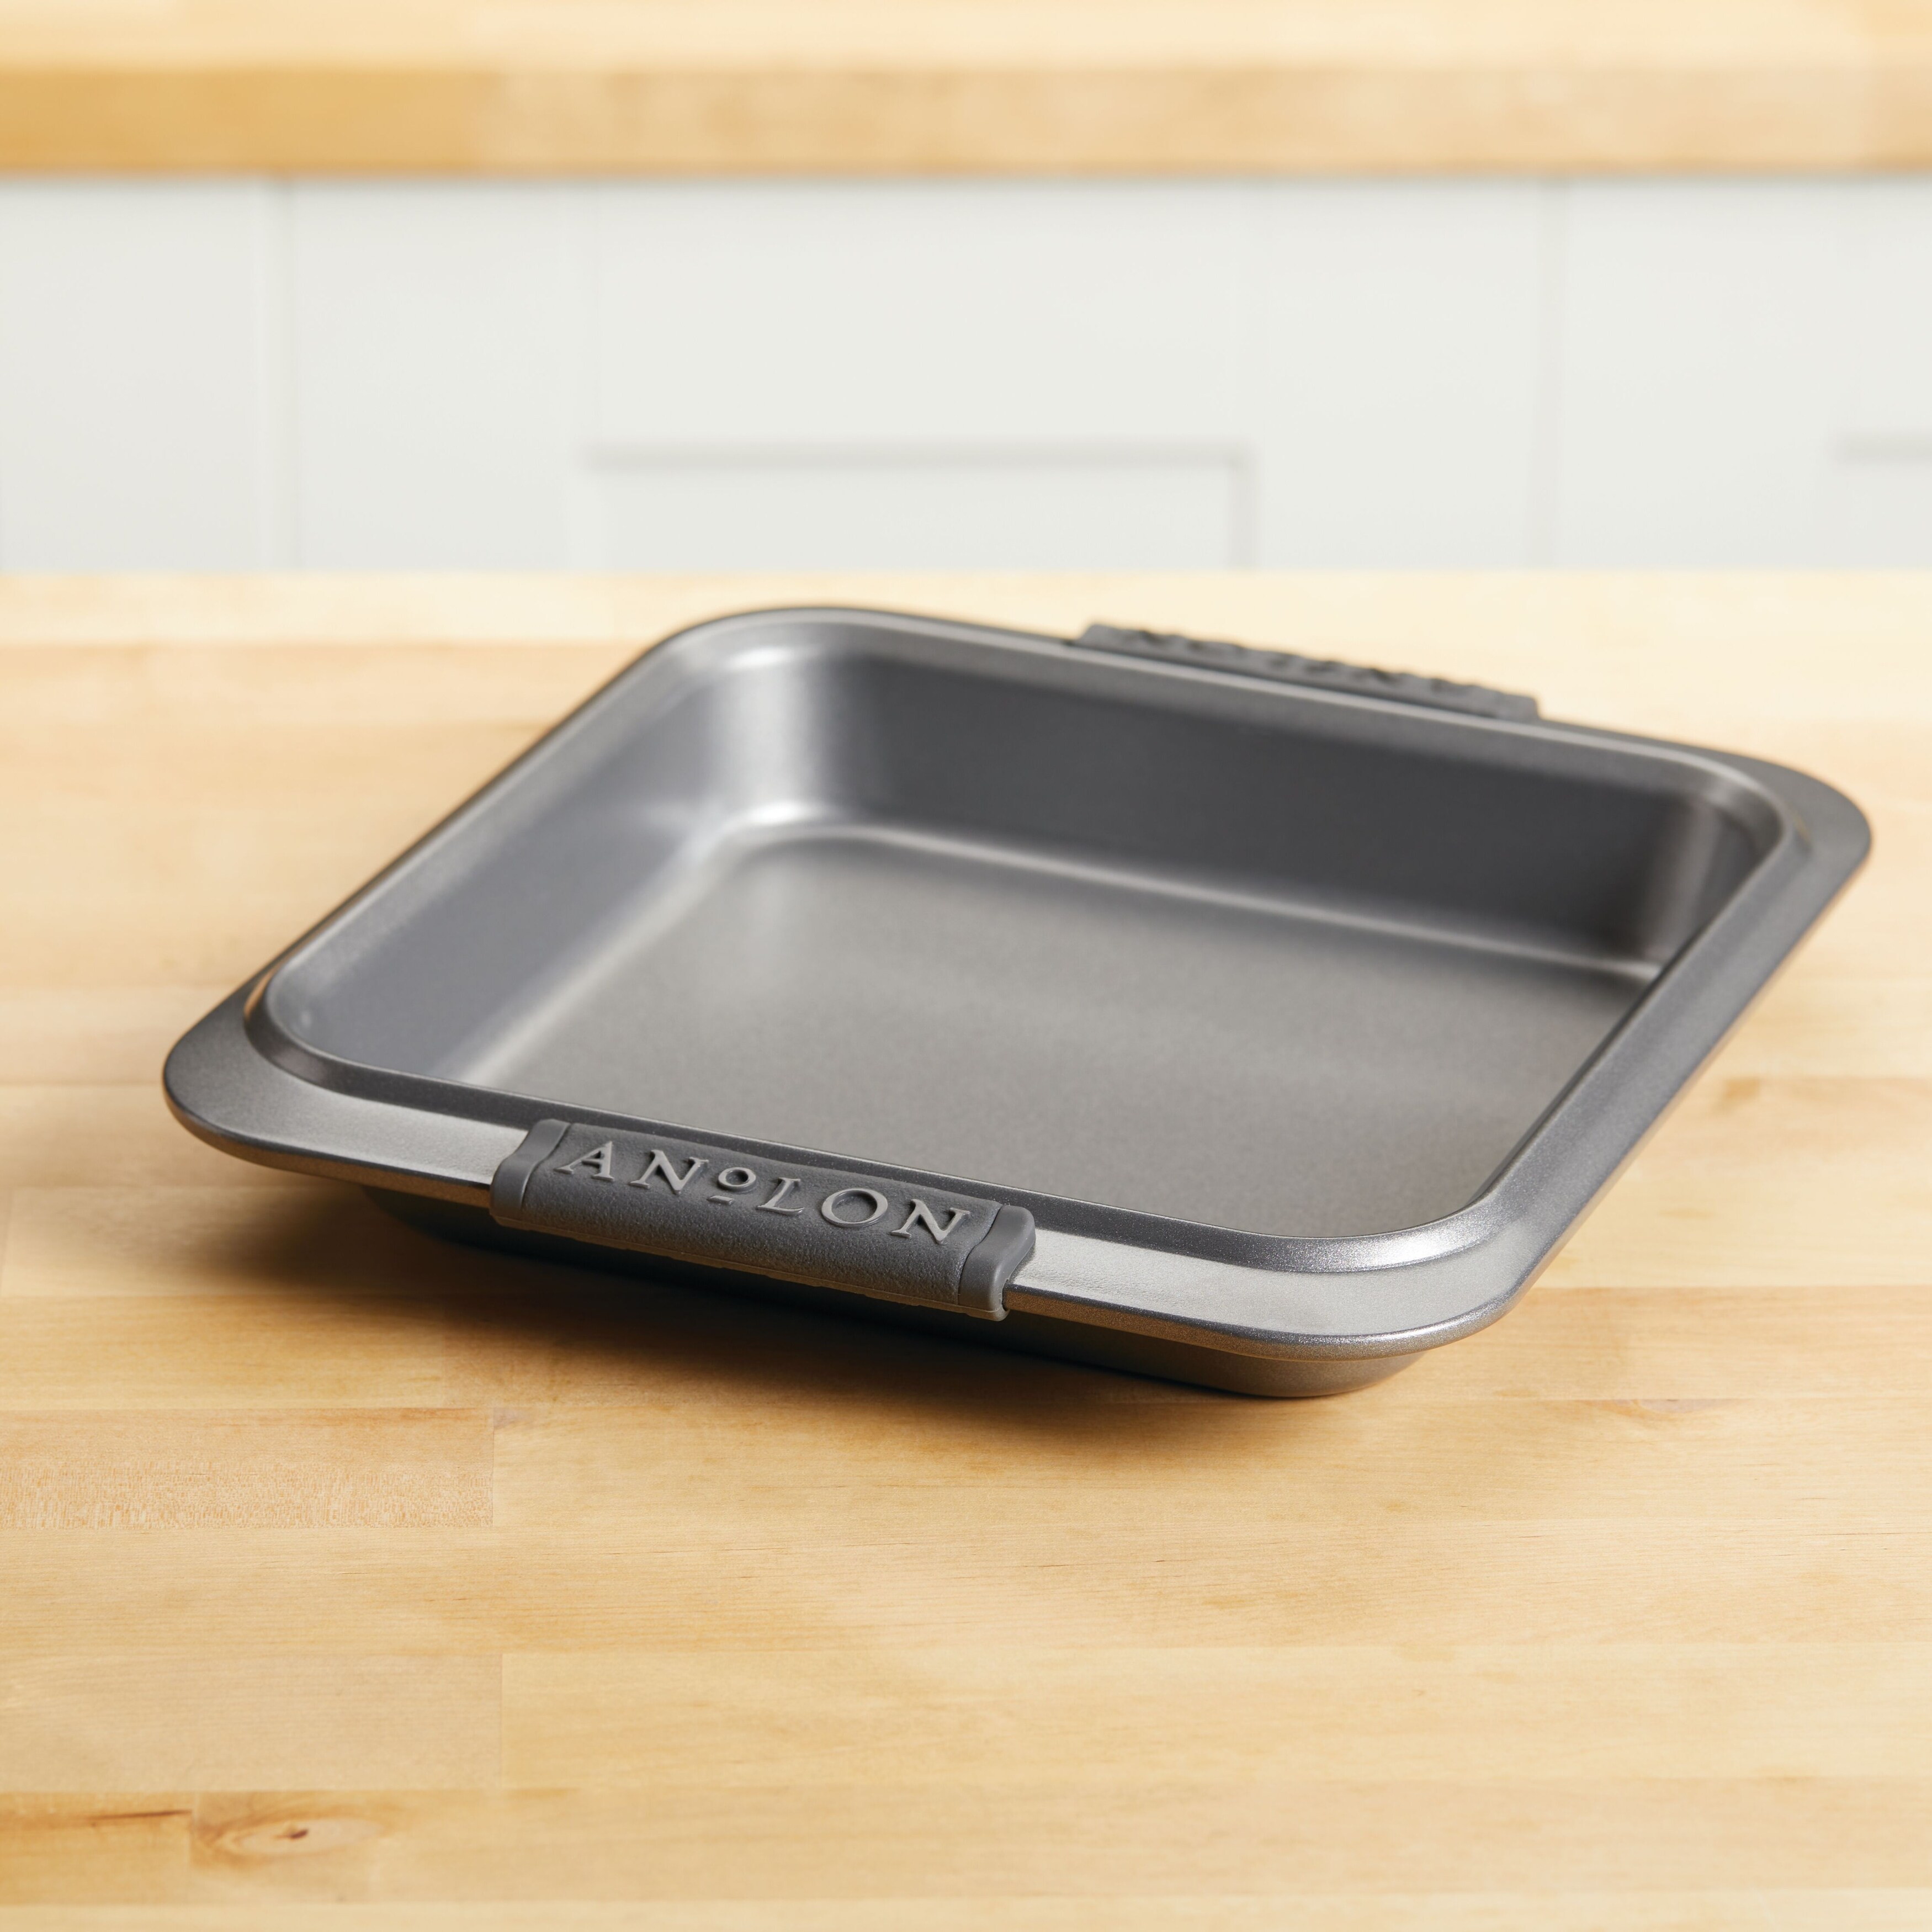 https://ak1.ostkcdn.com/images/products/is/images/direct/ef424331c1075f597bfd141d8bf1bea8a7dffbe1/Anolon-Advanced-Bakeware-Nonstick-Square-Cake-Pan%2C-9-Inch-x-9-Inch%2C-Gray.jpg